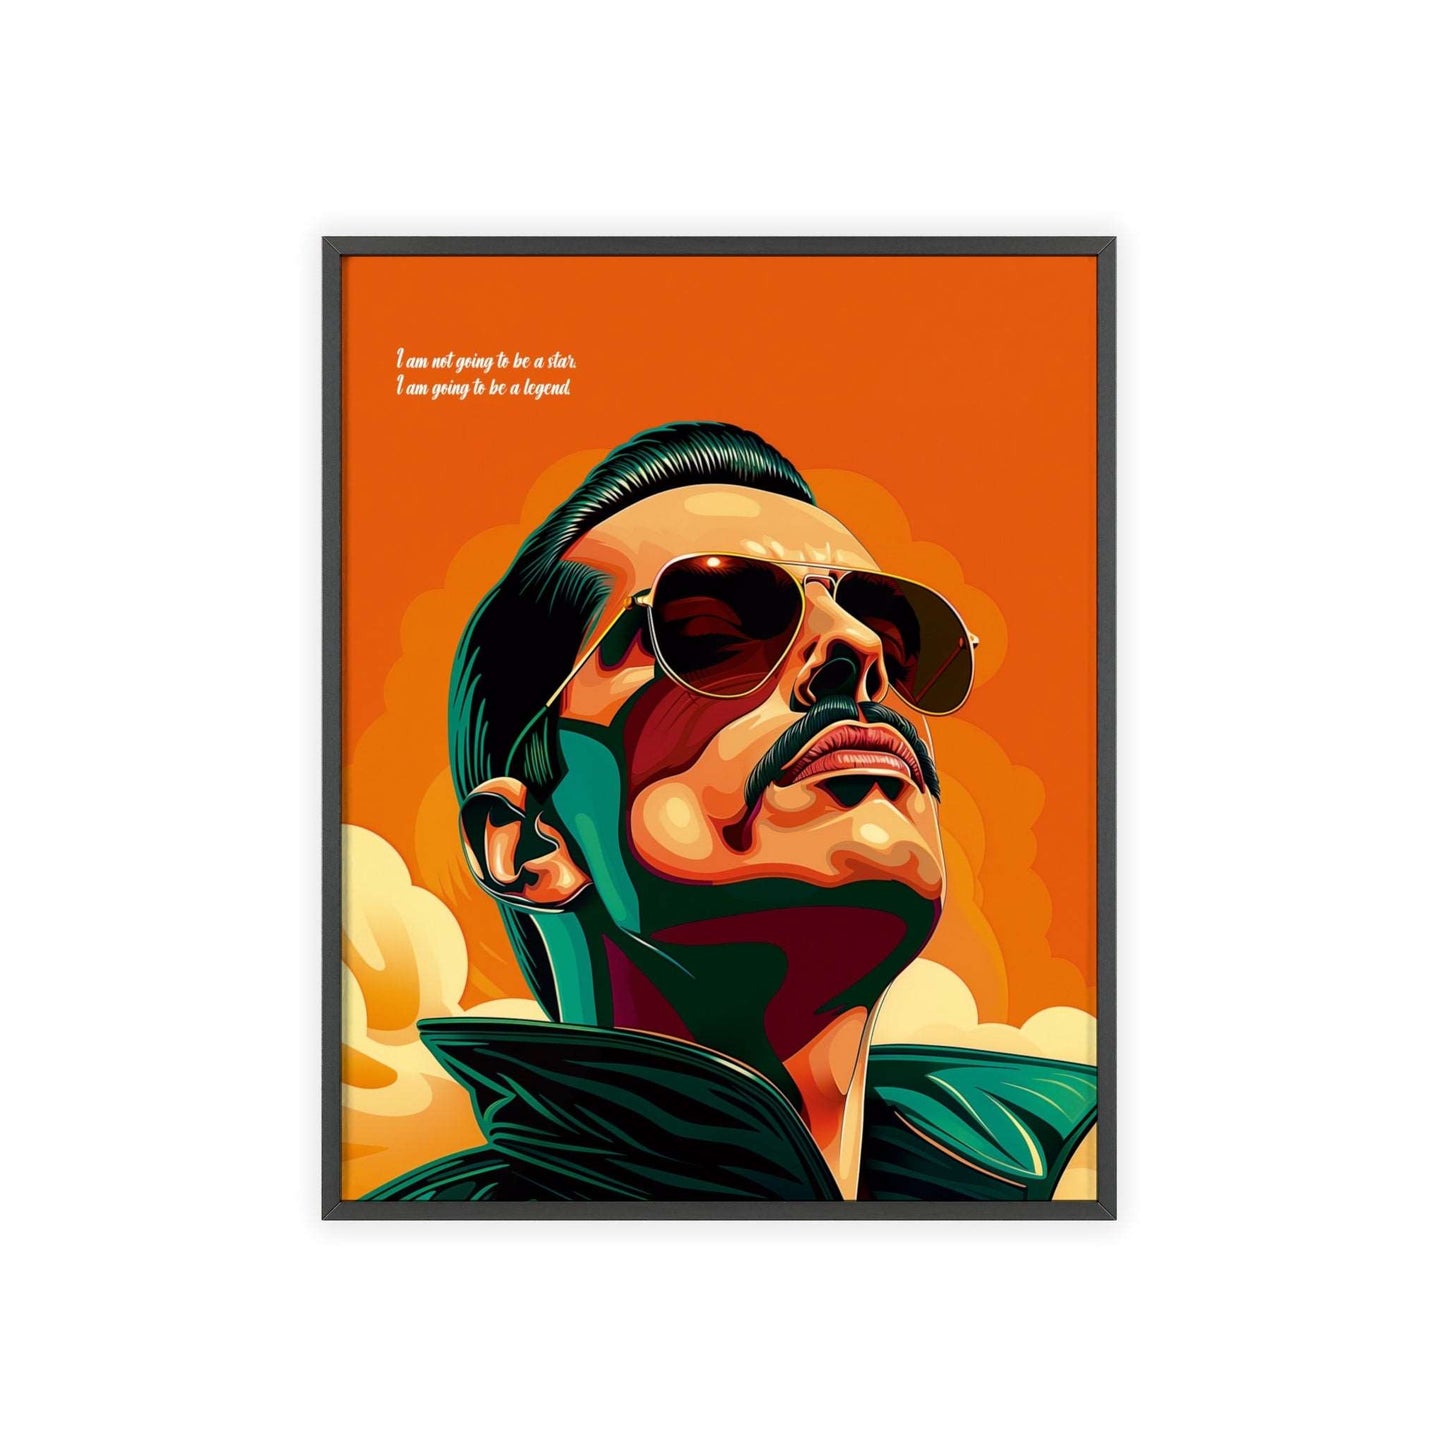 Freddie Mercury Portrait Poster - "I'm not going to be a star, I'm going to be a legend."